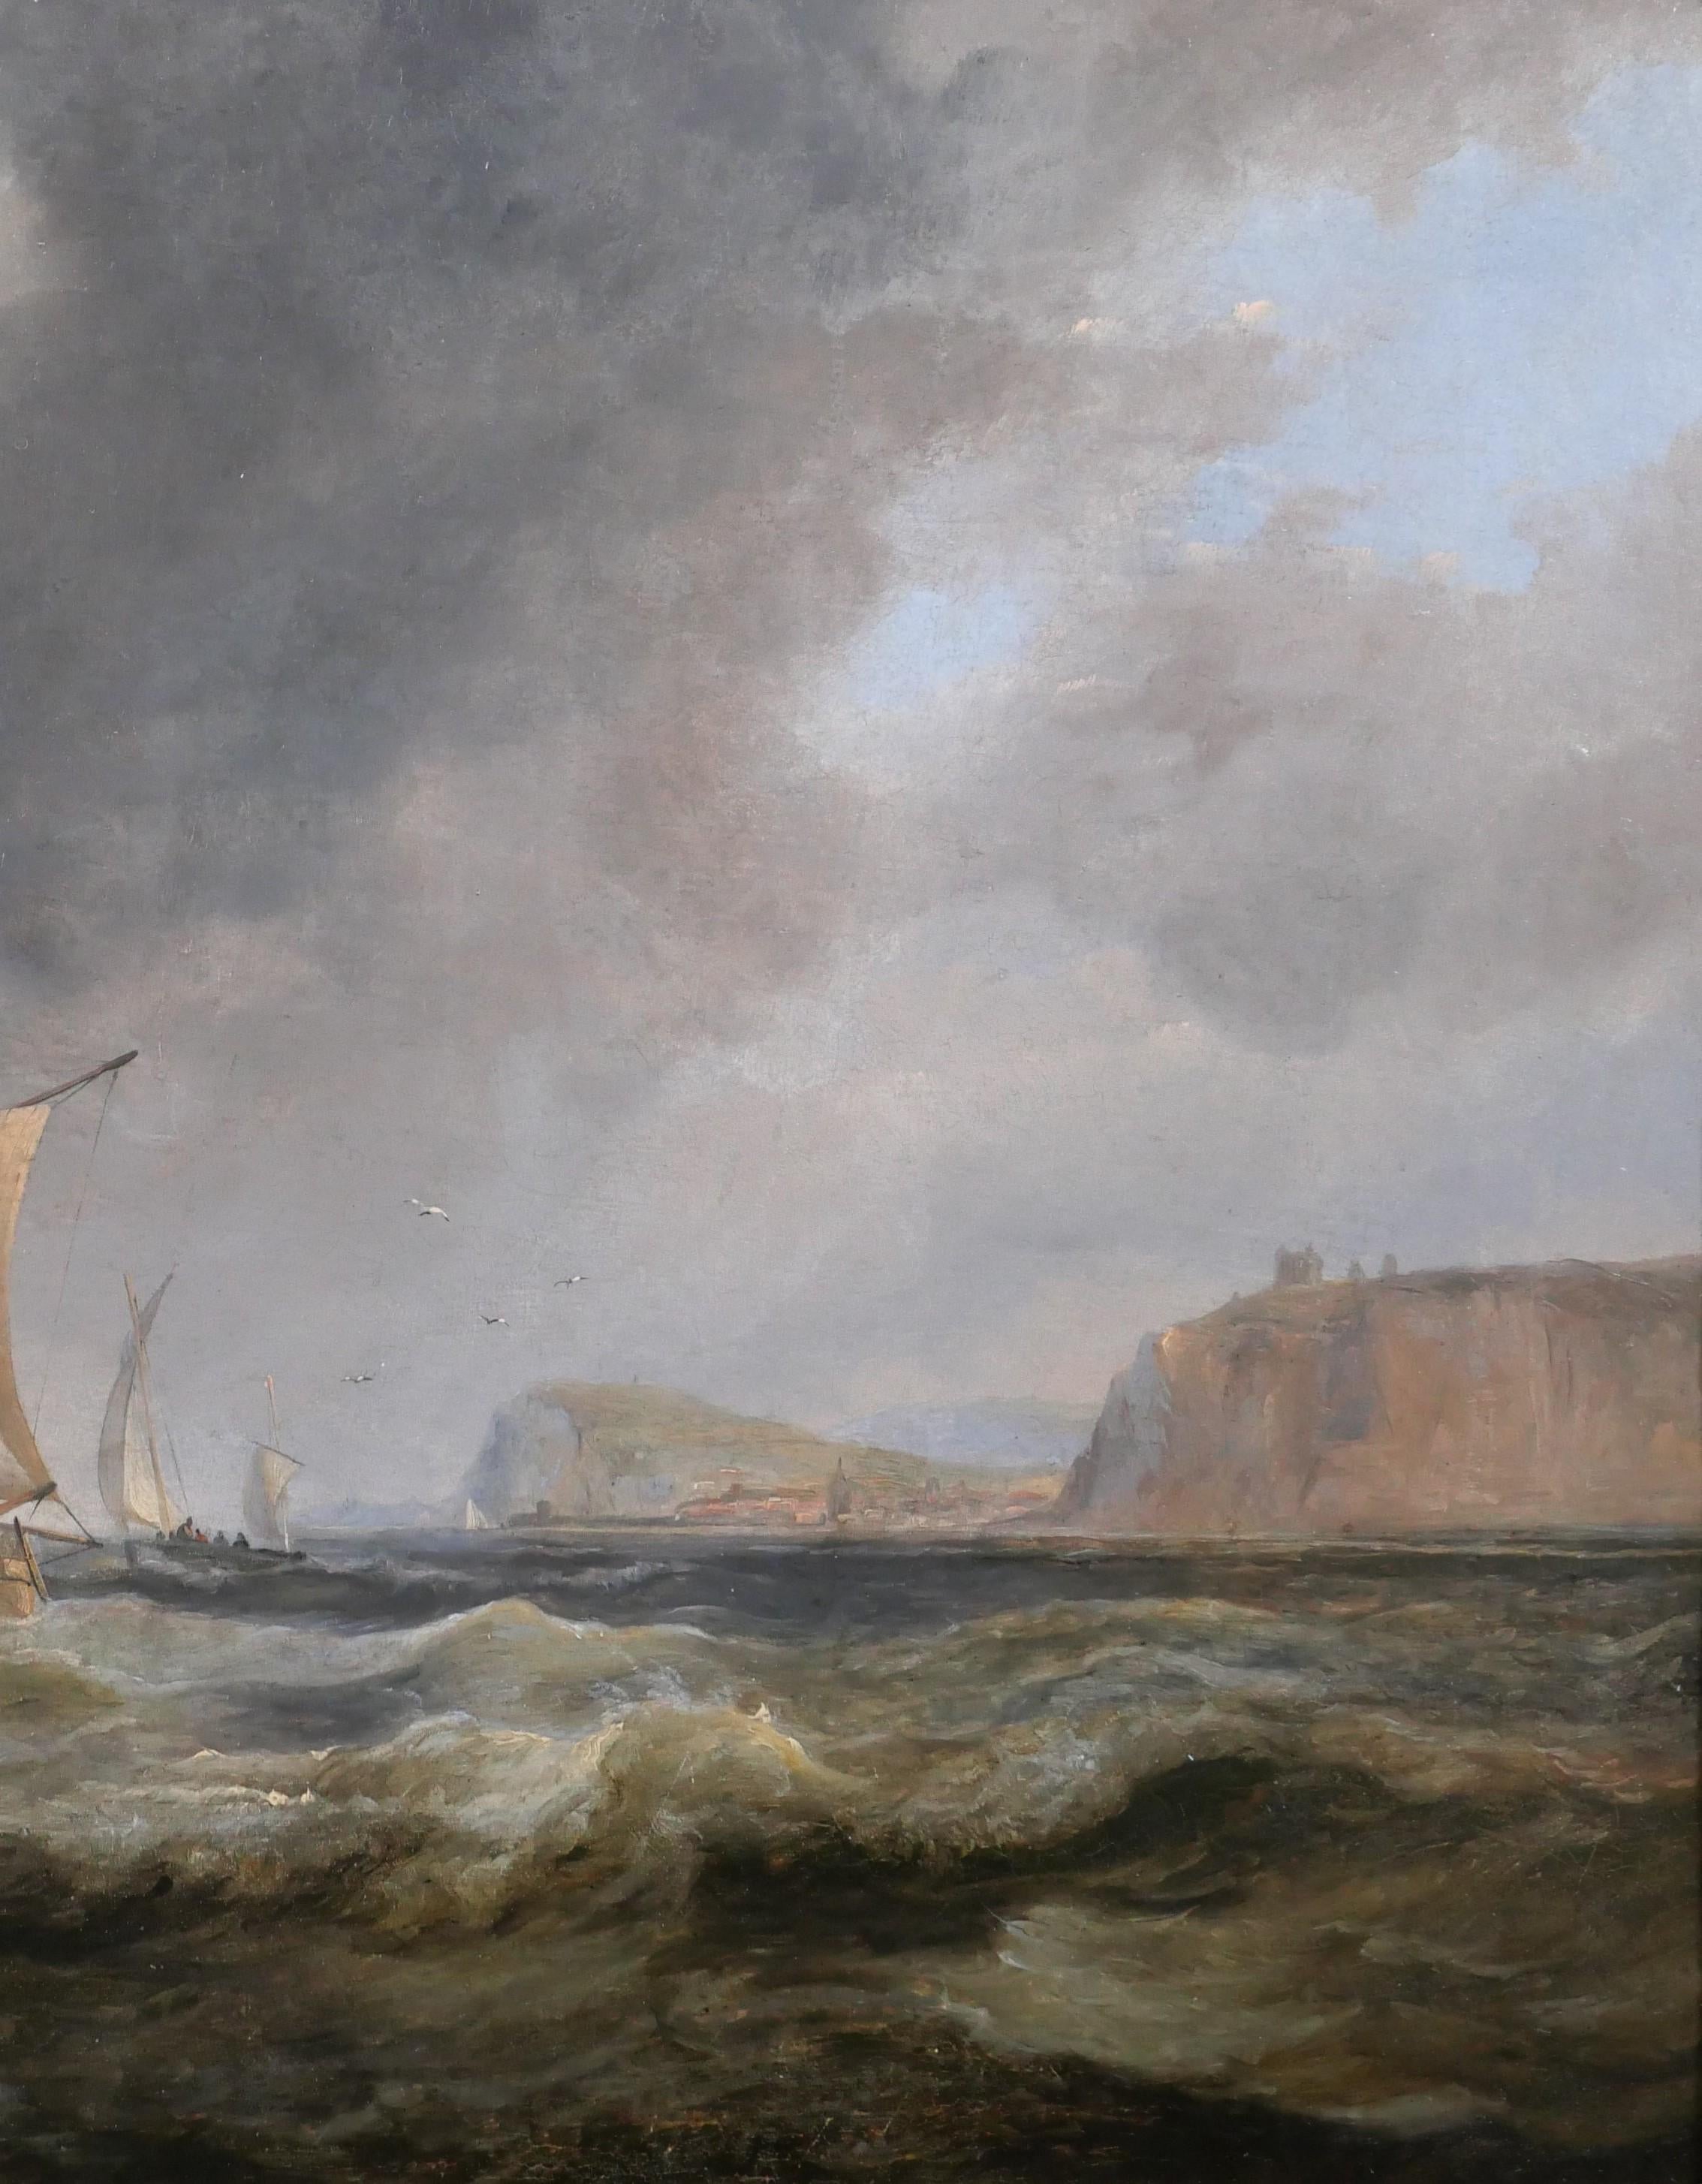 Charles-Louis VERBOECKHOVEN (attributed to)
Warneton, 1802 - Brussels, 1889
Boat off the coast of Fécamp (Normandy)
Painting, oil on cardboard
Unsigned
Painting: 39 x 29 cm
Beautiful original frame in a 17th century style: 58.5 x 48.5 cm
Very good